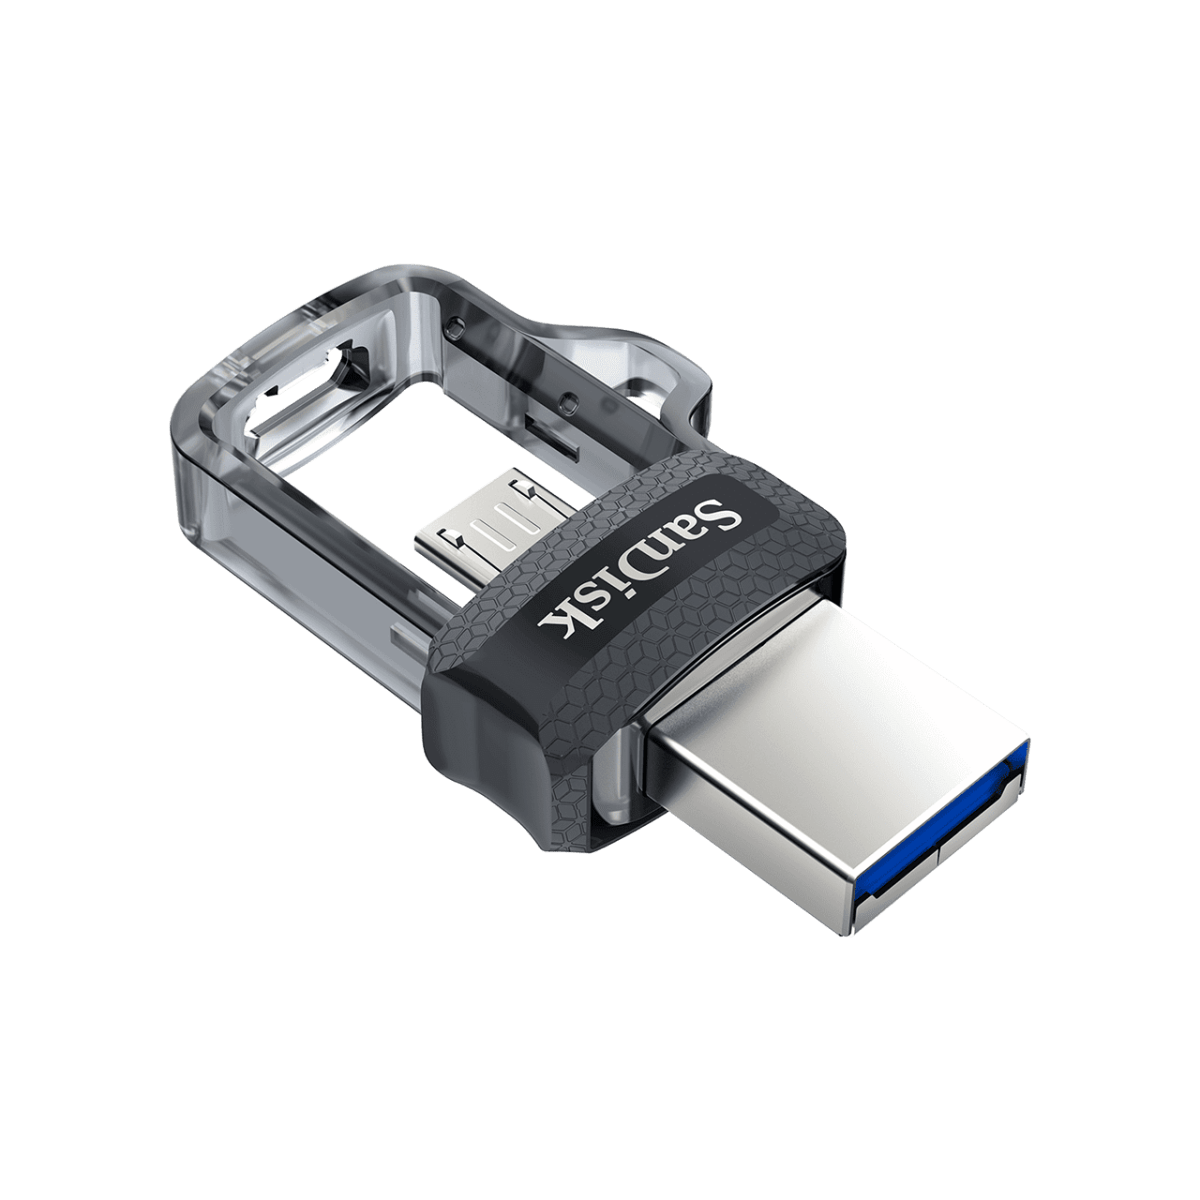 Ultra Dual Drive Usb M 3 Open Angled.png.thumb .1280.1280 Sandisk &Lt;Div Class=&Quot;Active&Quot; Data-Sku=&Quot;Sddd3-016G-A46&Quot;&Gt; &Lt;H1&Gt;Instantly Free Up Space On Your Android Smartphone&Lt;/H1&Gt; &Lt;Div Class=&Quot;Inheritpara Mb-4&Quot;&Gt; The Sandisk Ultra® Dual Drive M3.0 Makes It Easy To Transfer Content From Your Phone To Your Computer. With A Micro-Usb Connector On One End And A Usb 3.0 Connector On The Other, The Drive Lets You Move Content Easily Between Your Devices—From Your Android™ Smartphone Or Tablet To Your Laptop, Pc Or Mac Computer&Lt;A Class=&Quot;Disclosure&Quot; Href=&Quot;Https://Shop.westerndigital.com/Products/Usb-Flash-Drives/Sandisk-Ultra-Dual-Drive-M30-Usb-3-0-Micro-Usb#Disclosures&Quot; Target=&Quot;_Self&Quot; Rel=&Quot;Noopener Noreferrer&Quot; Aria-Labelledby=&Quot;Disclosures&Quot;&Gt;&Lt;Sup&Gt;1&Lt;/Sup&Gt;&Lt;/A&Gt;. The Usb 3.0 Connector Is High-Performance And Backward-Compatible With Usb 2.0 Ports. The Sandisk® Memory Zone App&Lt;A Class=&Quot;Disclosure&Quot; Href=&Quot;Https://Shop.westerndigital.com/Products/Usb-Flash-Drives/Sandisk-Ultra-Dual-Drive-M30-Usb-3-0-Micro-Usb#Disclosures&Quot; Target=&Quot;_Self&Quot; Rel=&Quot;Noopener Noreferrer&Quot; Aria-Labelledby=&Quot;Disclosures&Quot;&Gt;&Lt;Sup&Gt;2&Lt;/Sup&Gt;&Lt;/A&Gt; For Android (Available On Google Play) Helps You Manage Your Device’s Memory And Your Content. &Lt;Strong&Gt;Warranty&Lt;/Strong&Gt; The Sandisk Ultra Flair Usb 3.0 Flash Drive Is Backed By A Five-Year Manufacturer Warranty&Lt;A Class=&Quot;Disclosure&Quot; Href=&Quot;Https://Shop.westerndigital.com/Products/Usb-Flash-Drives/Sandisk-Ultra-Flair-Usb-3-0#Disclosures&Quot; Target=&Quot;_Self&Quot; Rel=&Quot;Noopener Noreferrer&Quot; Aria-Labelledby=&Quot;Disclosures&Quot;&Gt;&Lt;Sup&Gt;2&Lt;/Sup&Gt;&Lt;/A&Gt; &Lt;/Div&Gt; &Lt;/Div&Gt; Sandisk Ultra Dual Drive M3.0 Flash Drive For Android Smartphones (64Gb)